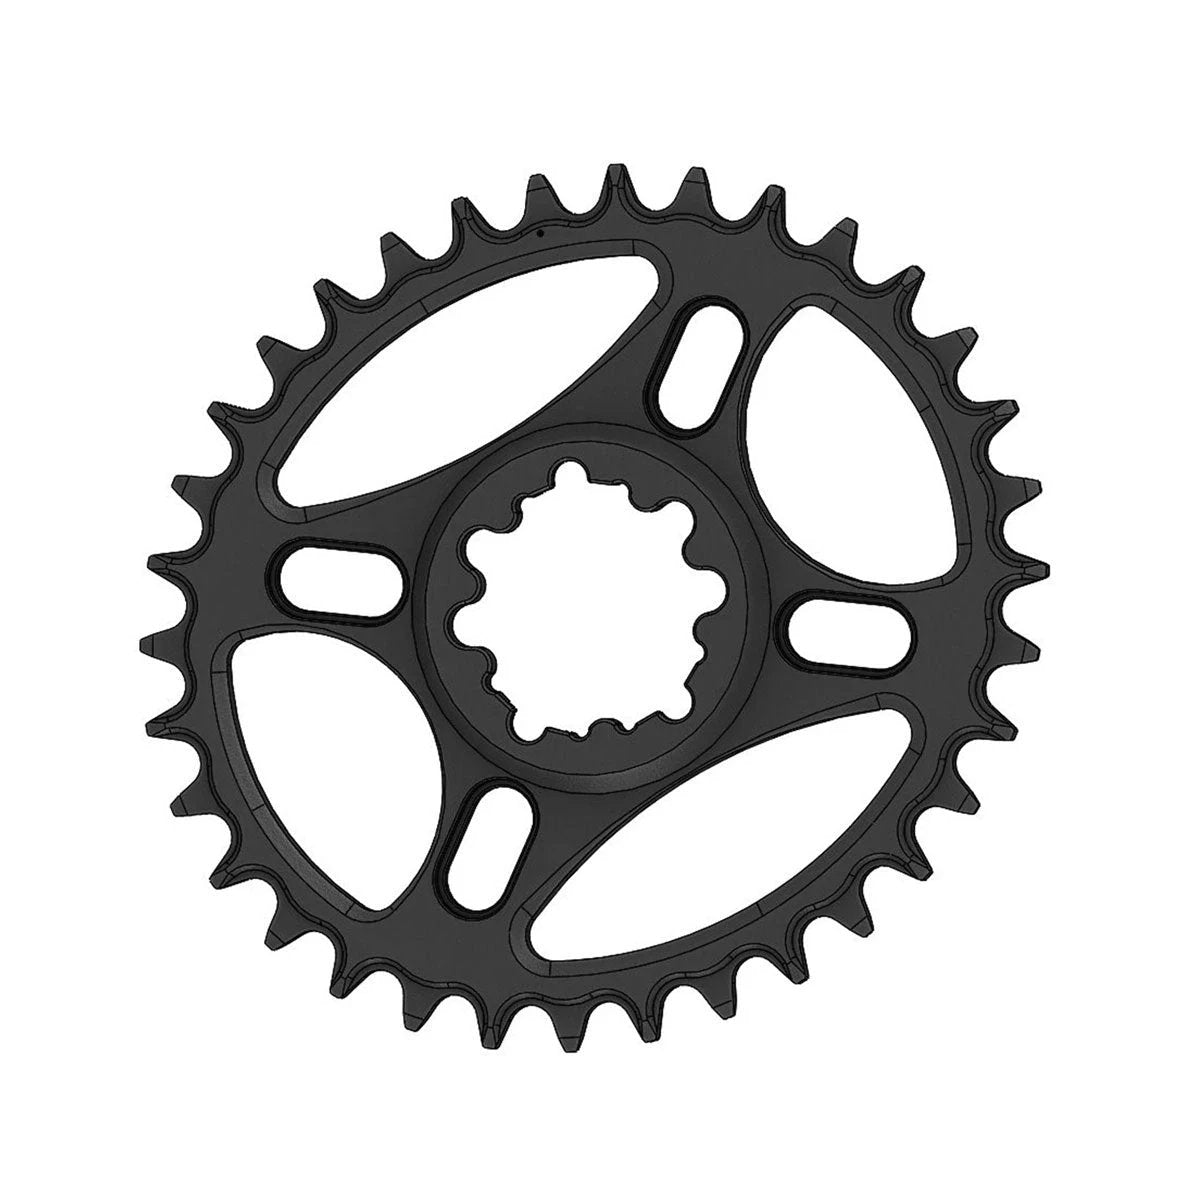 Pilo 34T Chainring For Sram Cranks - Replacement Chainrings